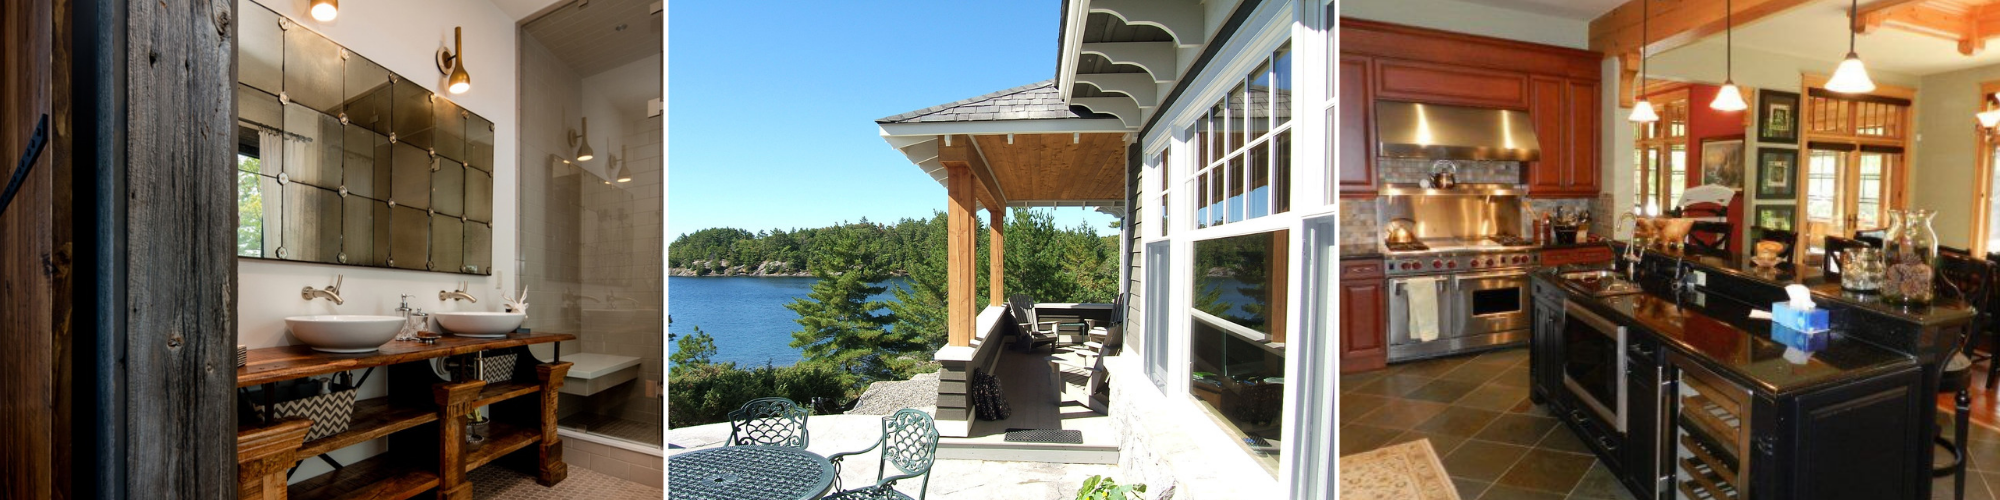 4 Ways to Get Ready to Enjoy Spring at the Cottage 2